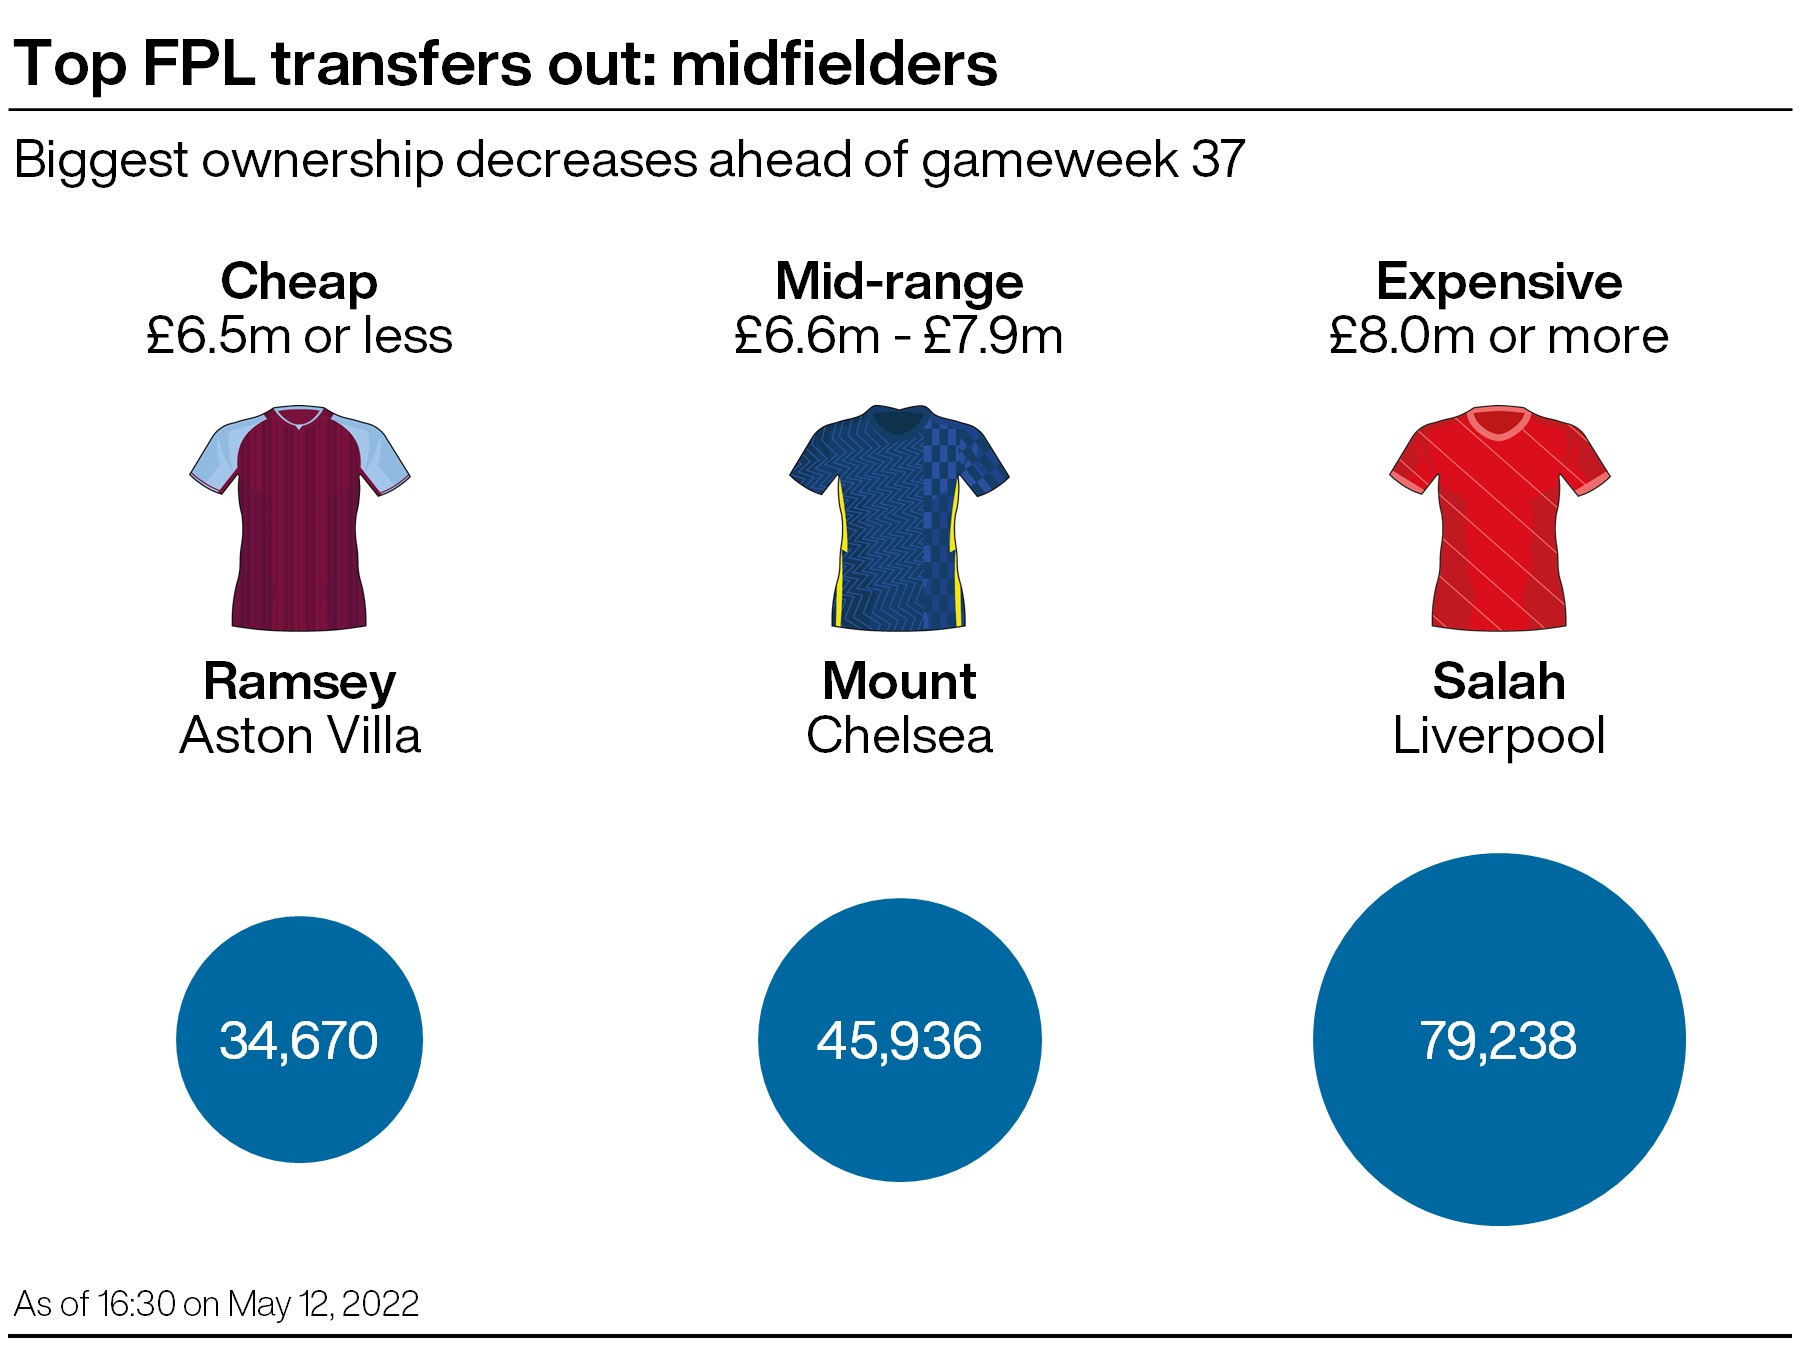 A graphic showing some of the most popular FPL transfers ahead of gameweek 37 of the season